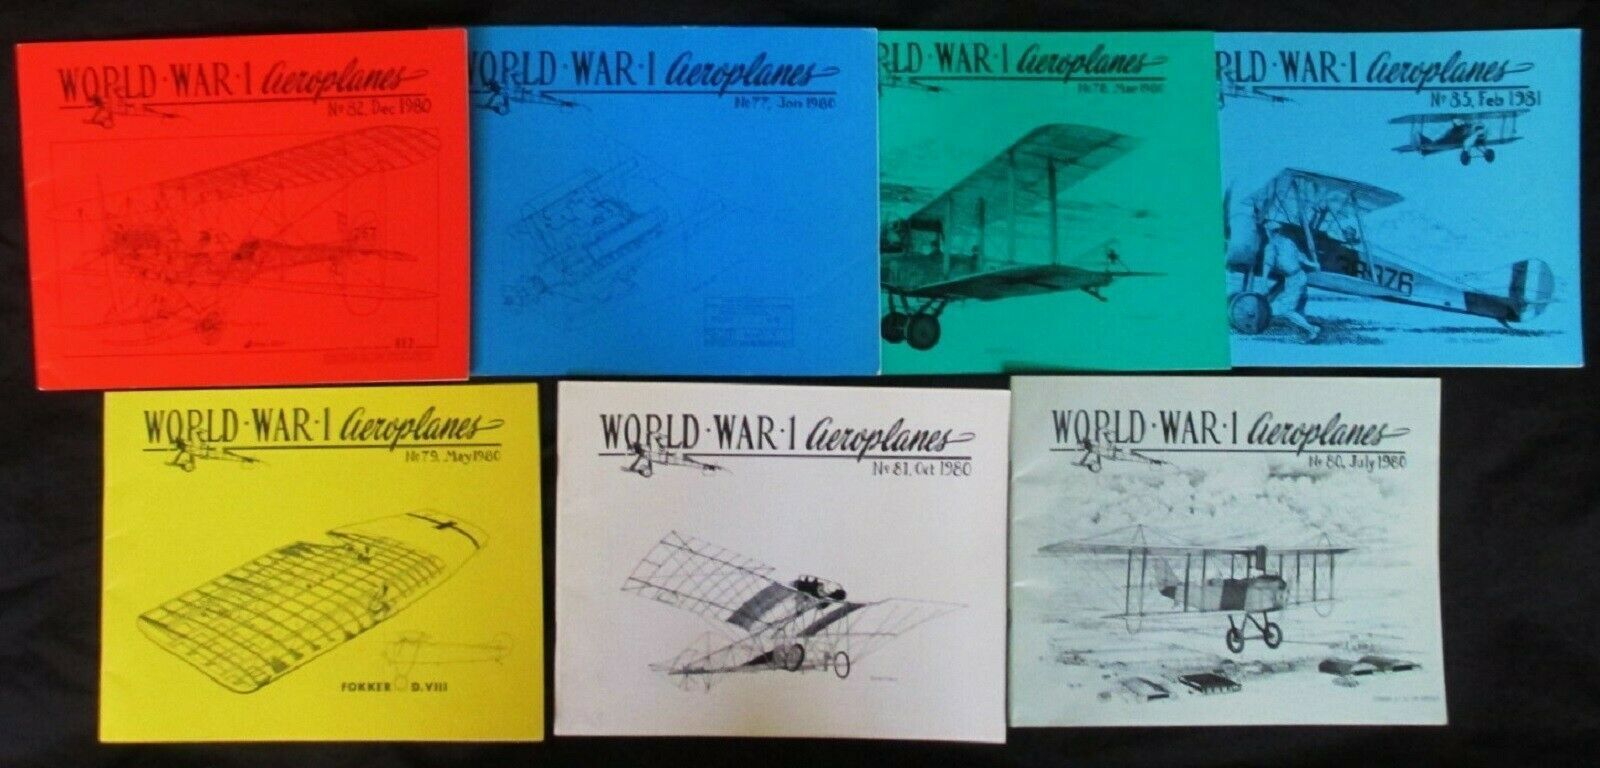 WWI Aeroplanes  Magazine Lot of 7 Issues 1980 1981 World War I Aircraft Airplane